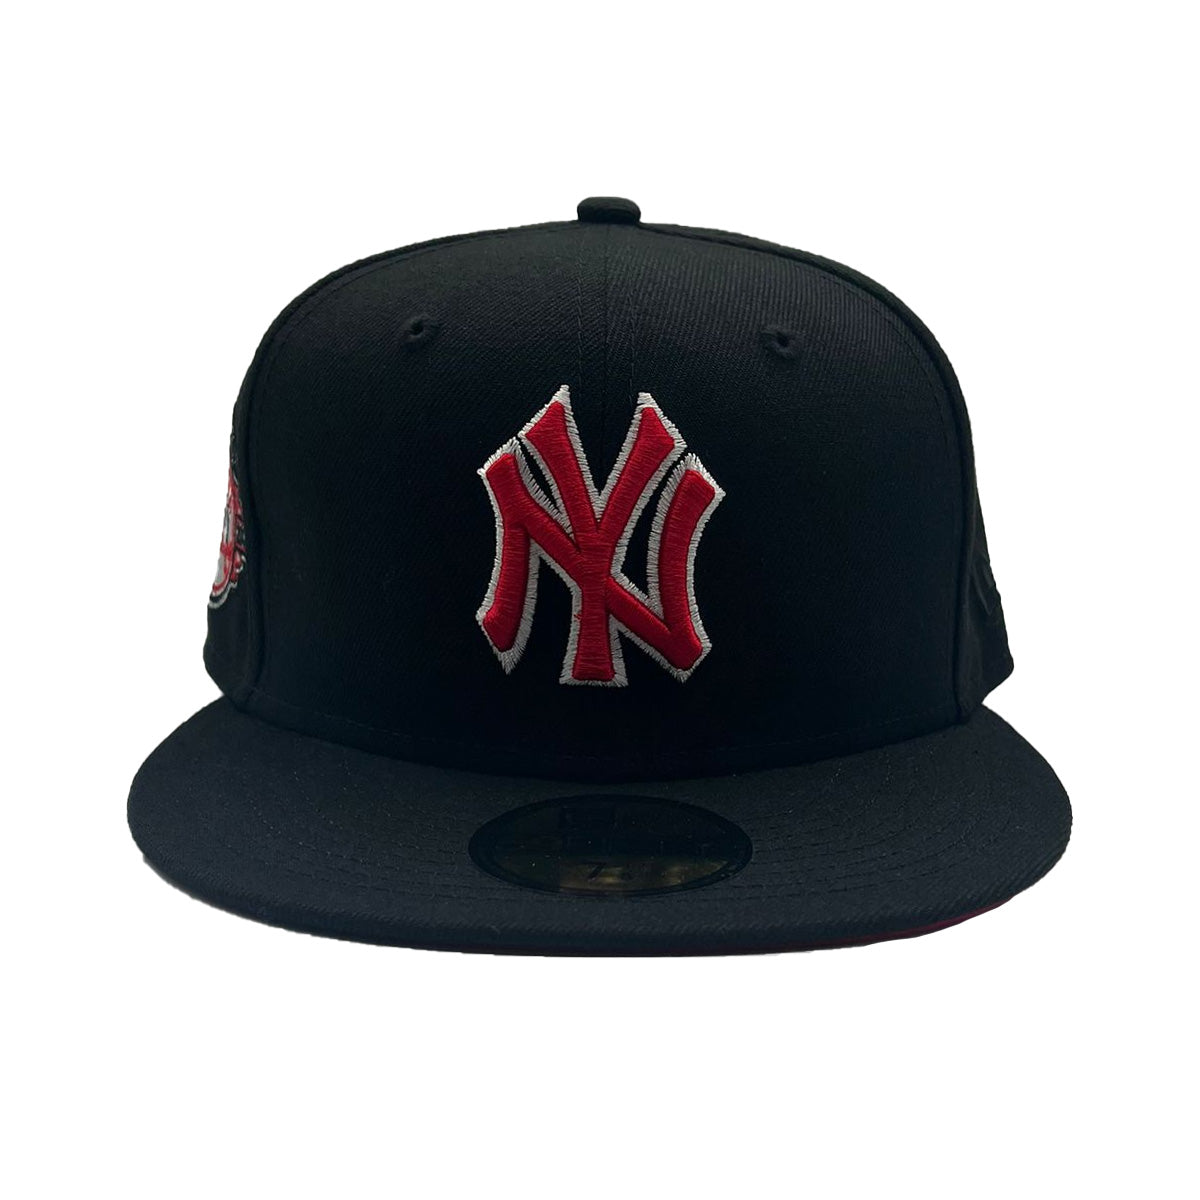 New York Highlanders LOW-CROWN 1903 COOPERSTOWN Fitted Hat